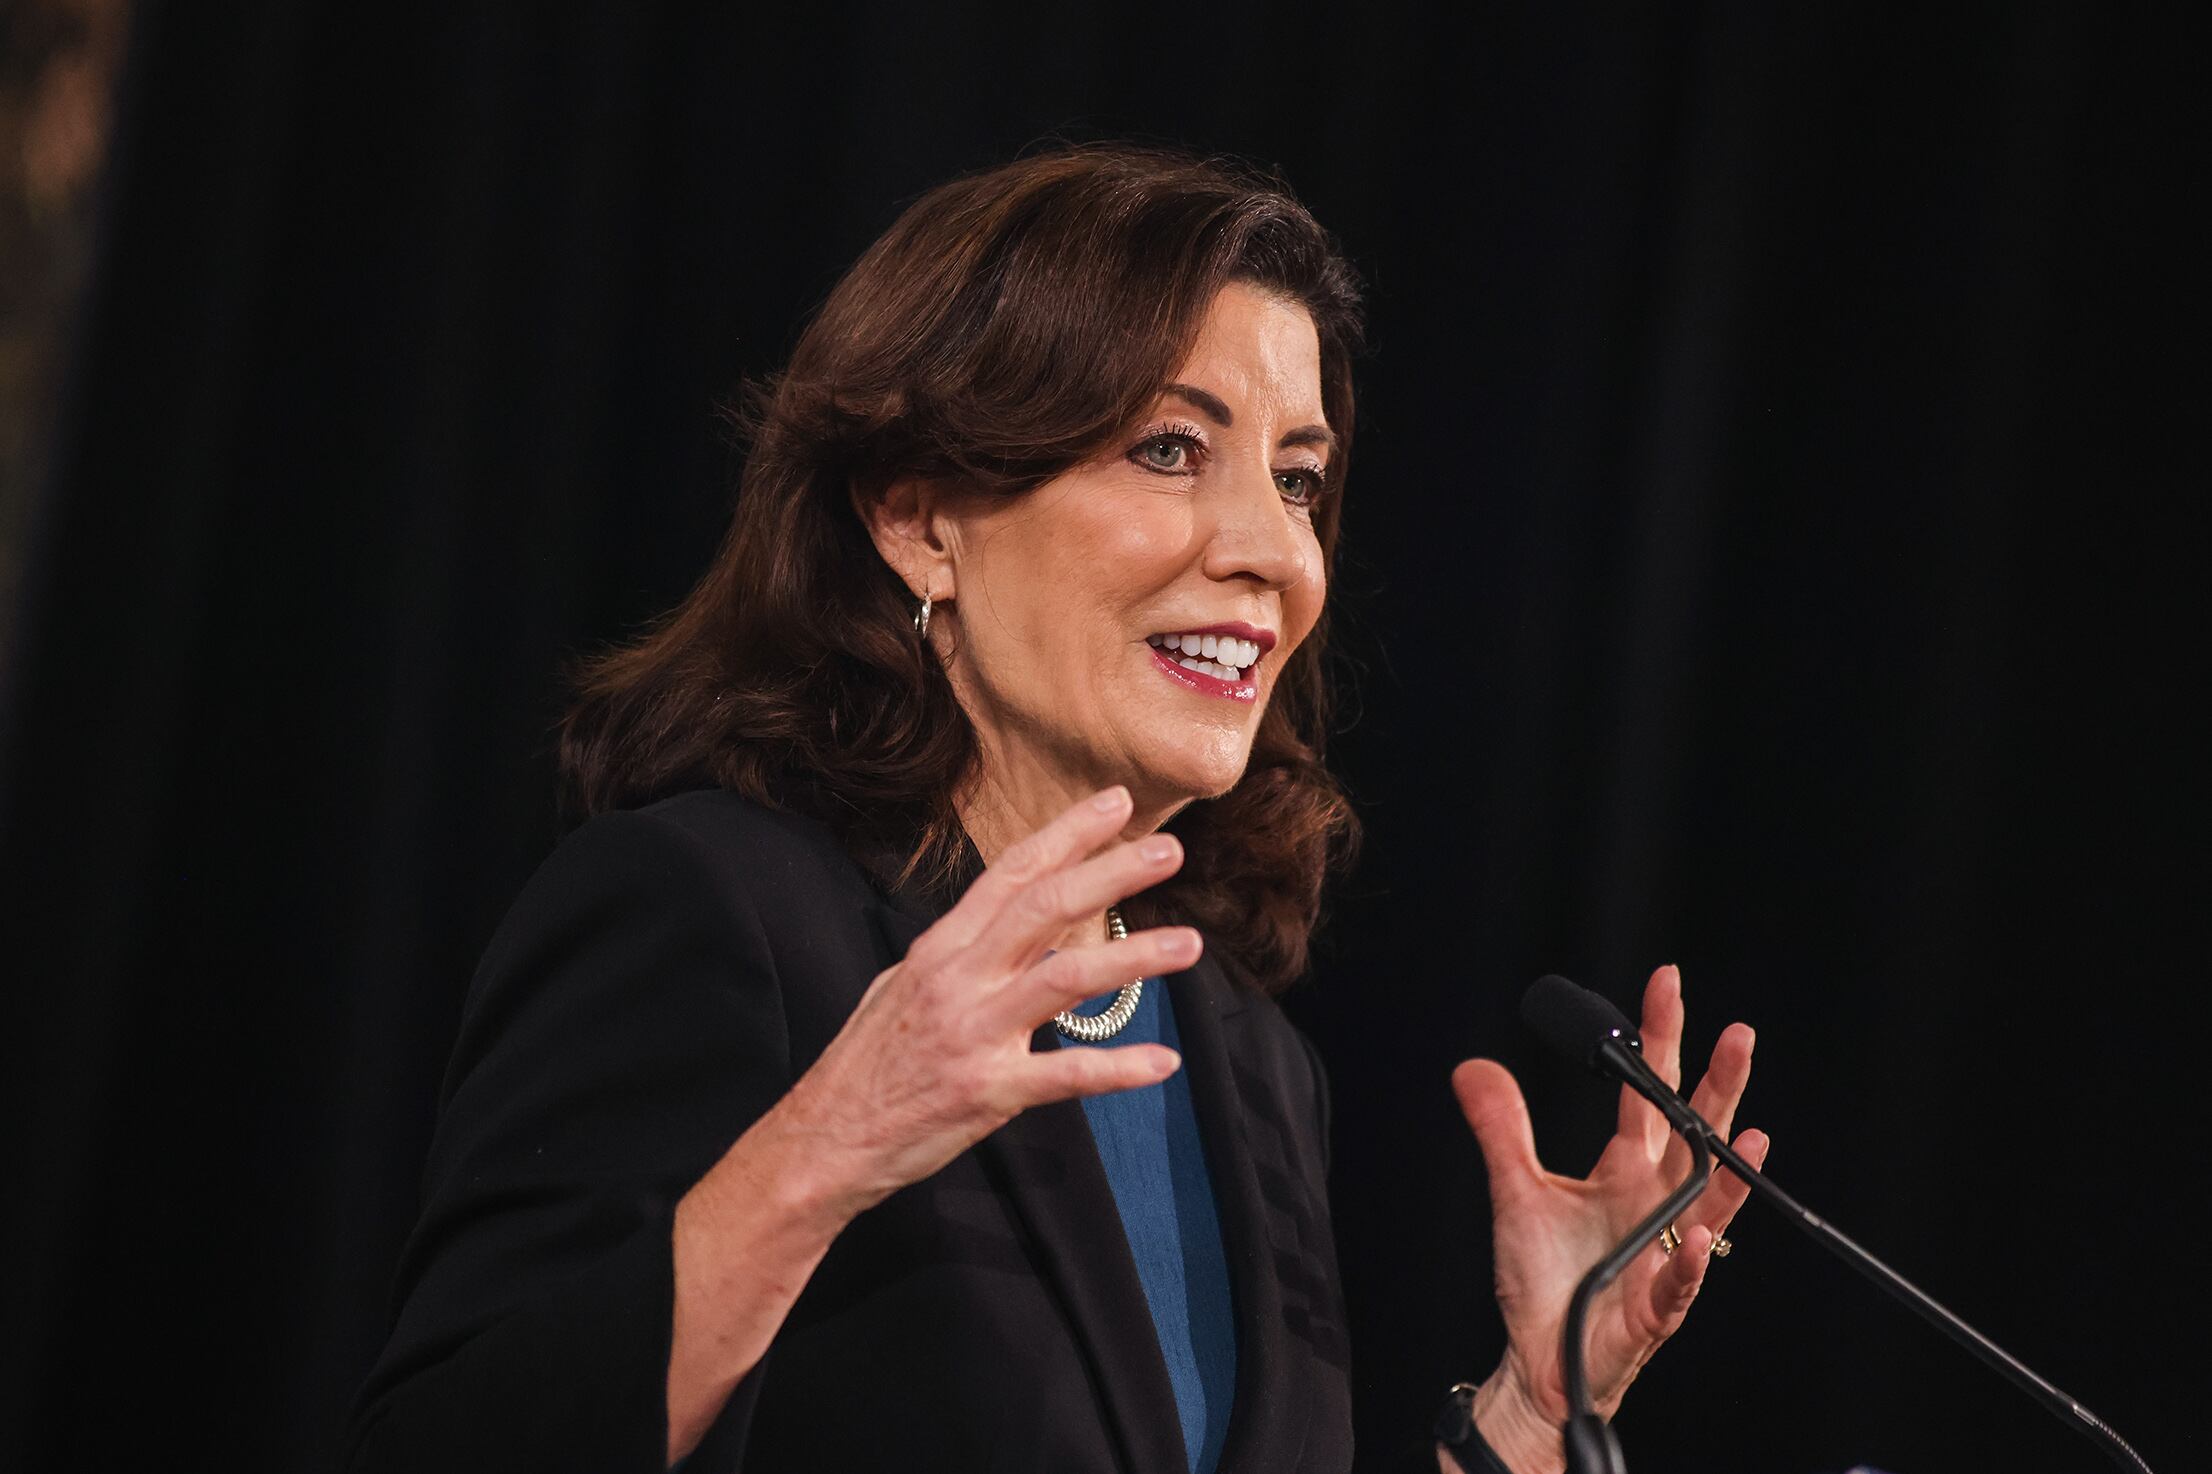 A woman with medium length brown hair holds her hands up while she speaks at a podium with a dark background.